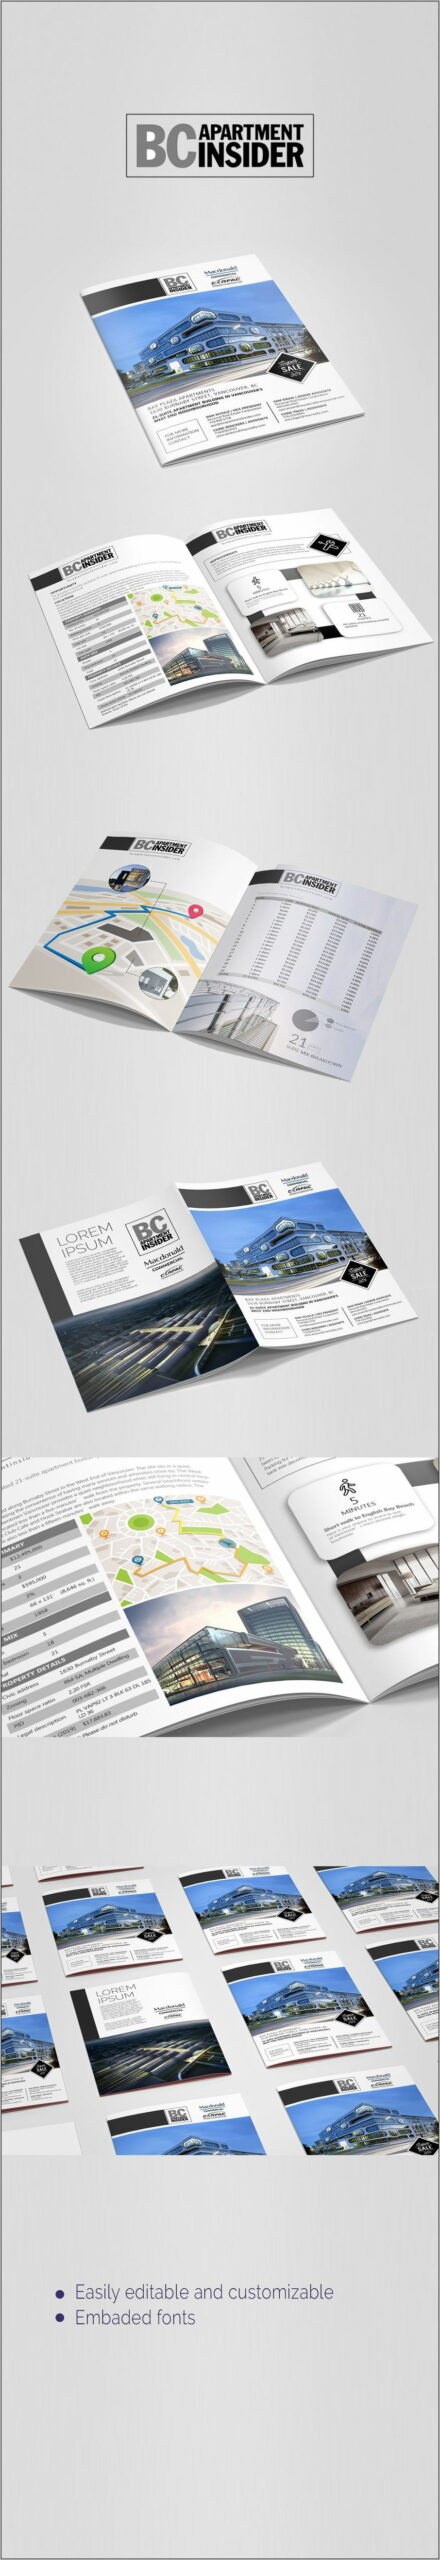 Template For Commercial Real Estate Brochure